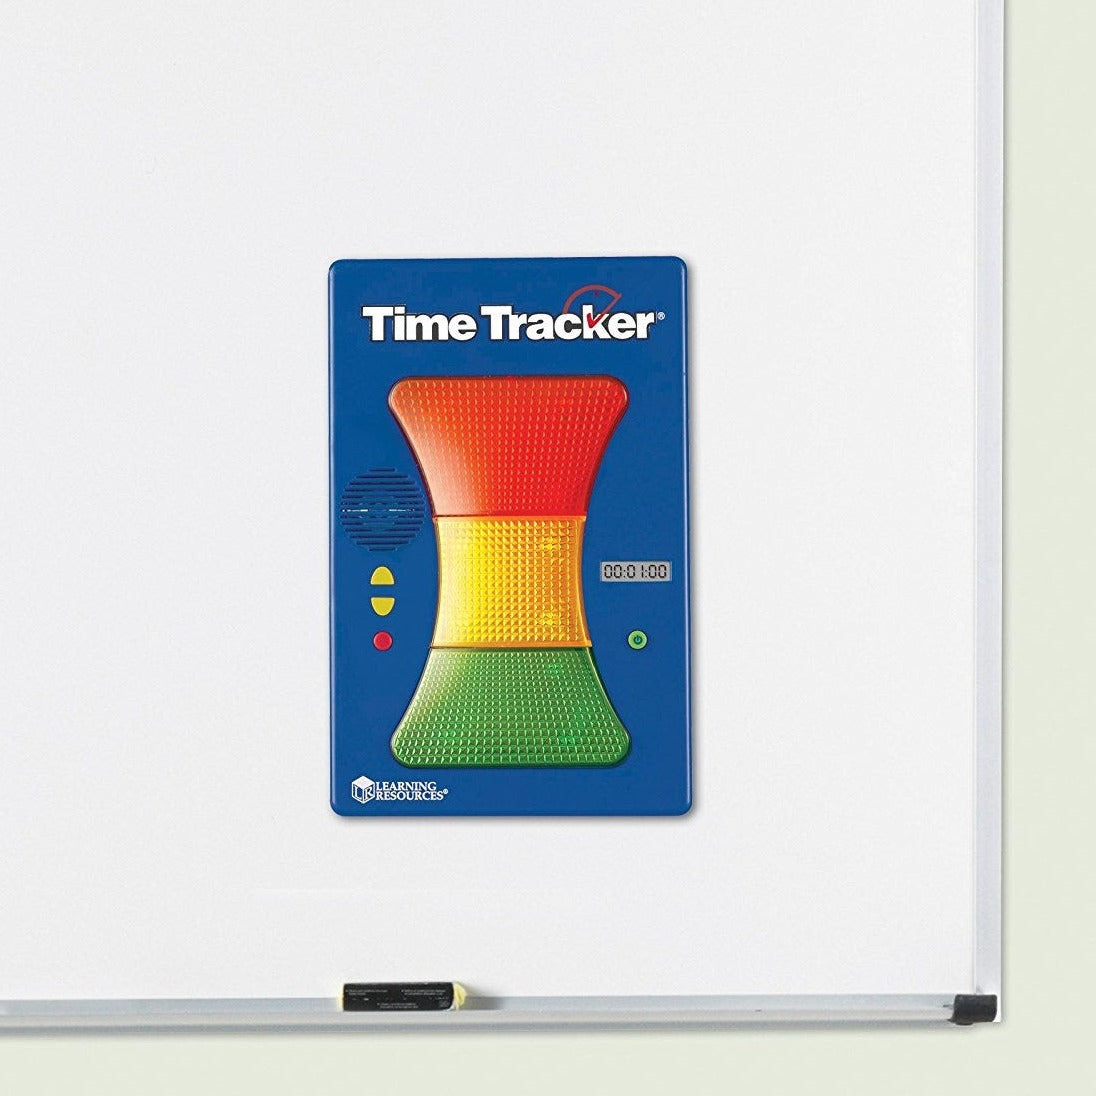 Magnetic Time Tracker, The Magnetic Time Tracker is perfect for helping children keep track of time. The Magnetic Time Tracker is easy to programme, the green, yellow and red sections track time from one minute to 24 hours. The lights and sounds help students visualise and hear how much time remains. When it's time to get in the car, eat the peas, brush teeth, put the toys away, get dressed, turn off the TV, get out of the bath,you won't be asking your kids for the zillionth time, or wondering to yourself, 